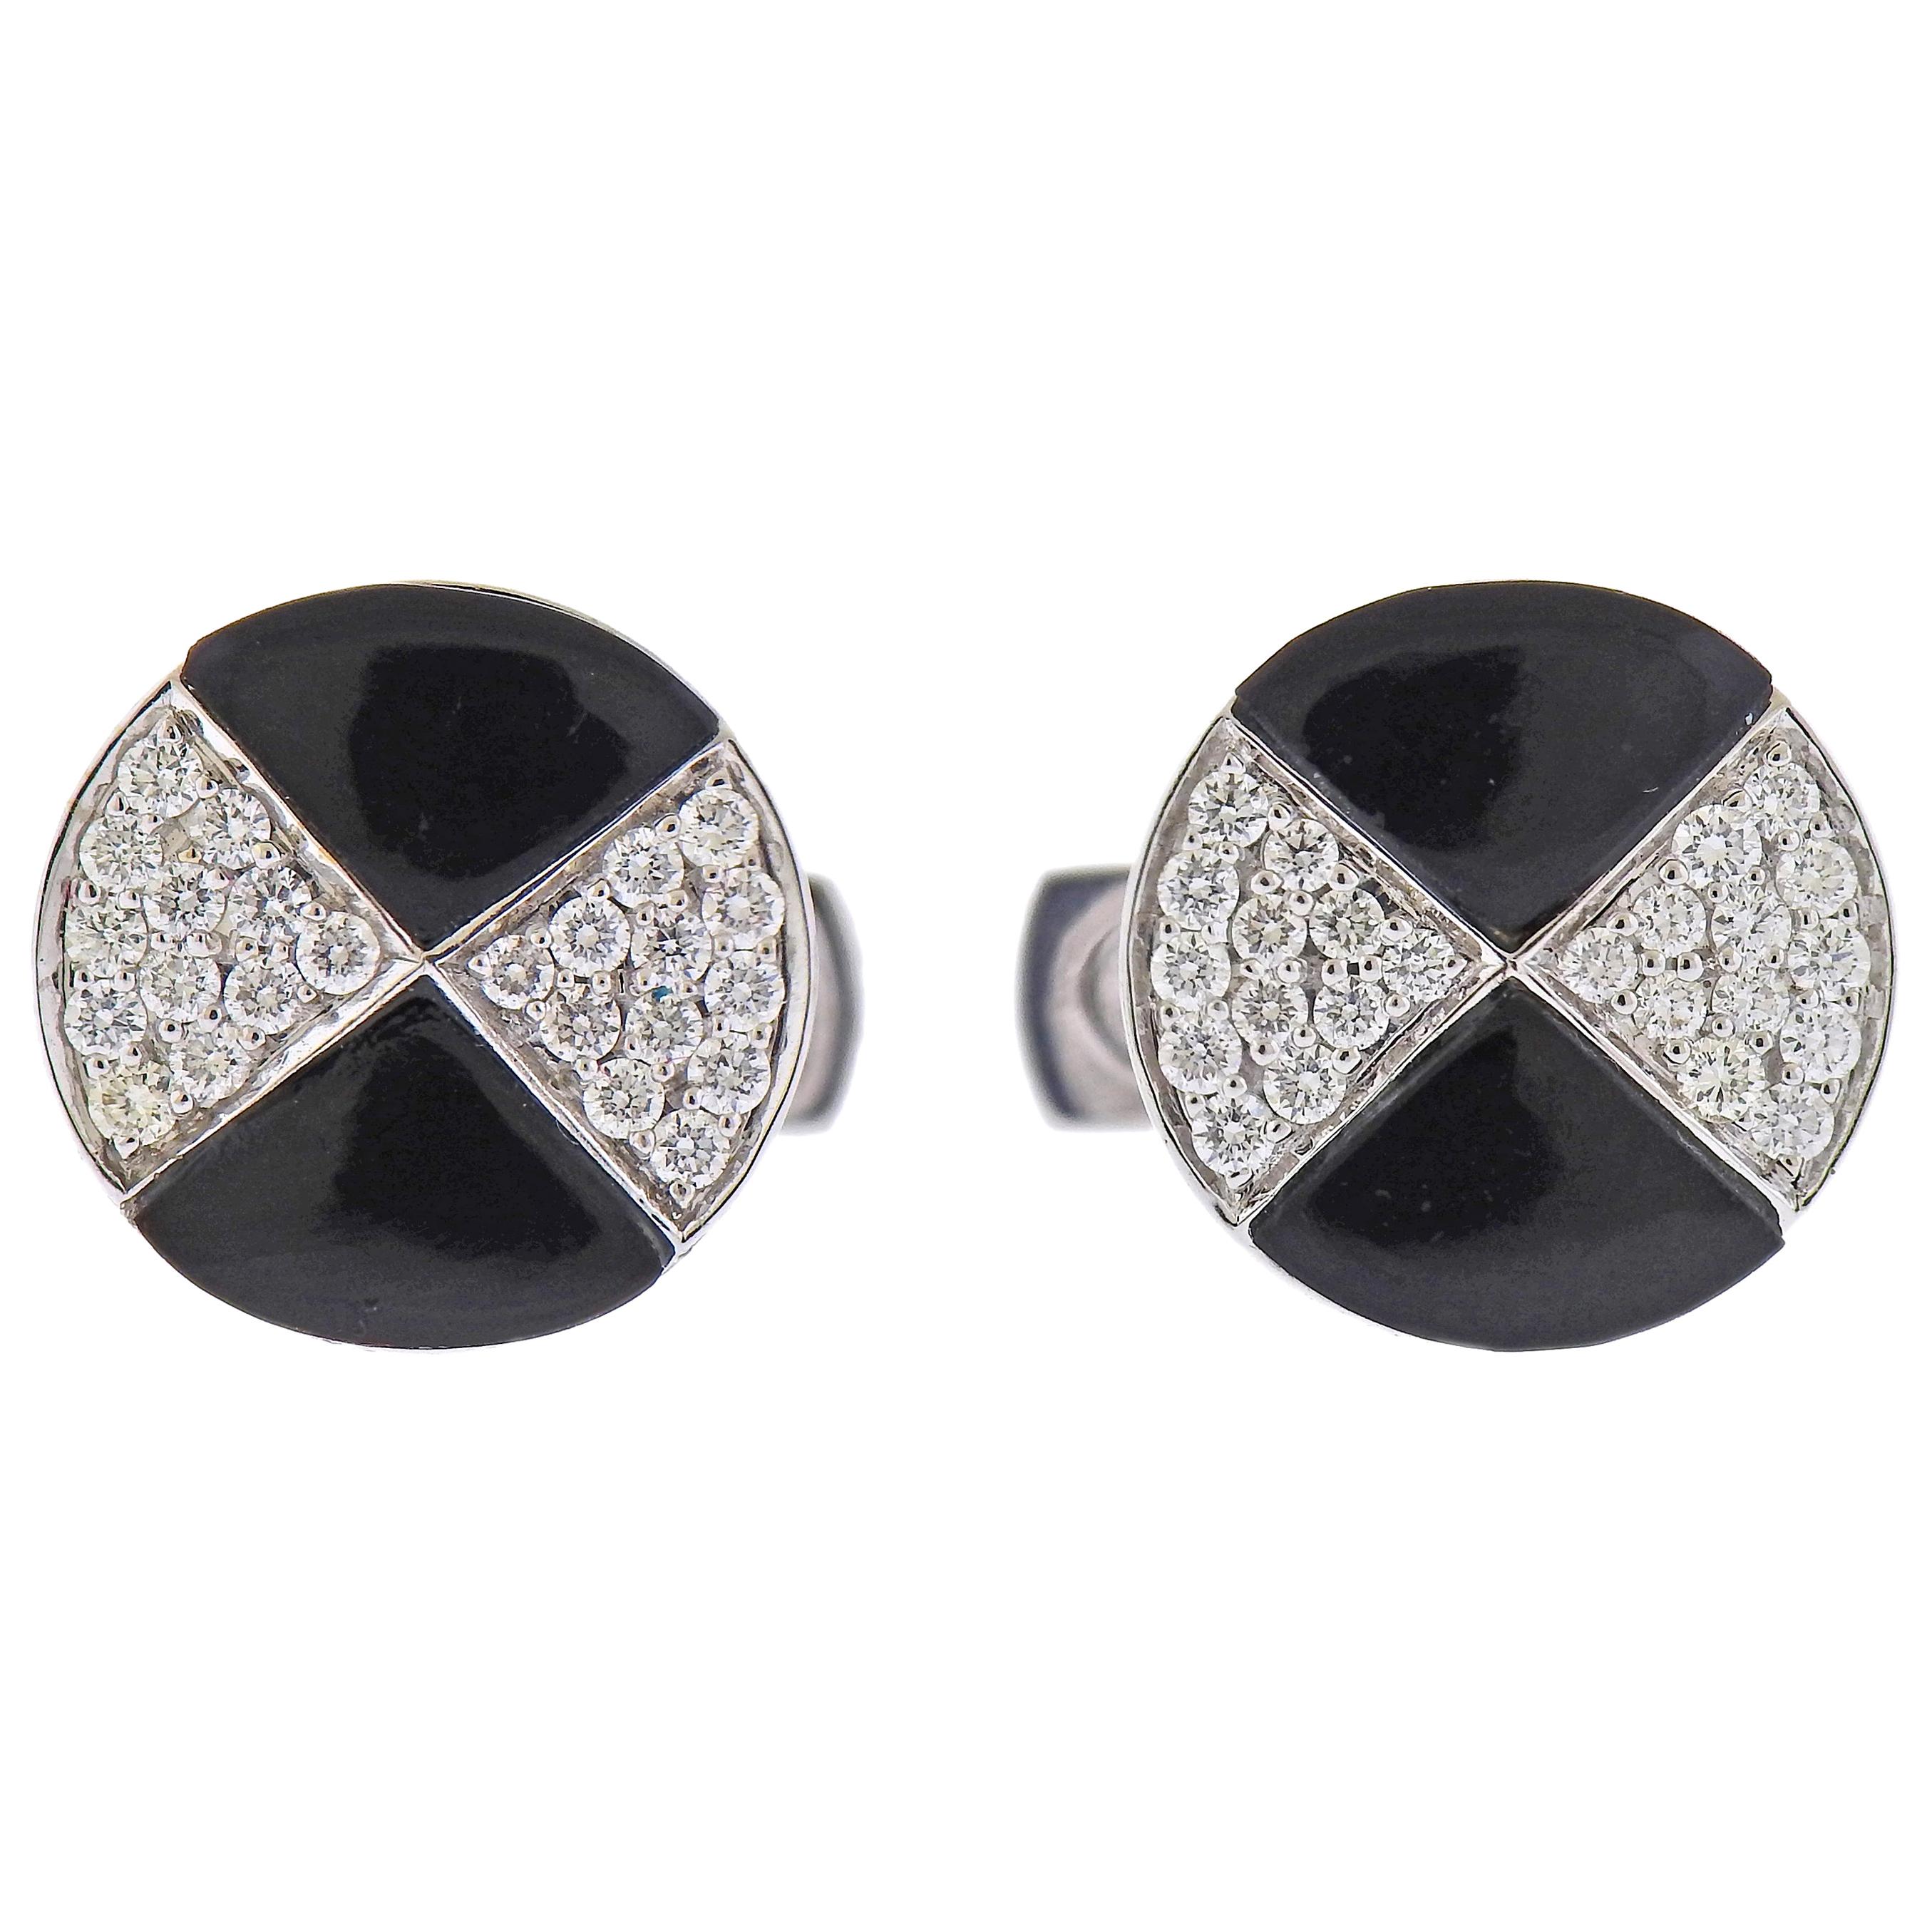 Onyx Cuff Links for Men set in 14K Yellow Gold 